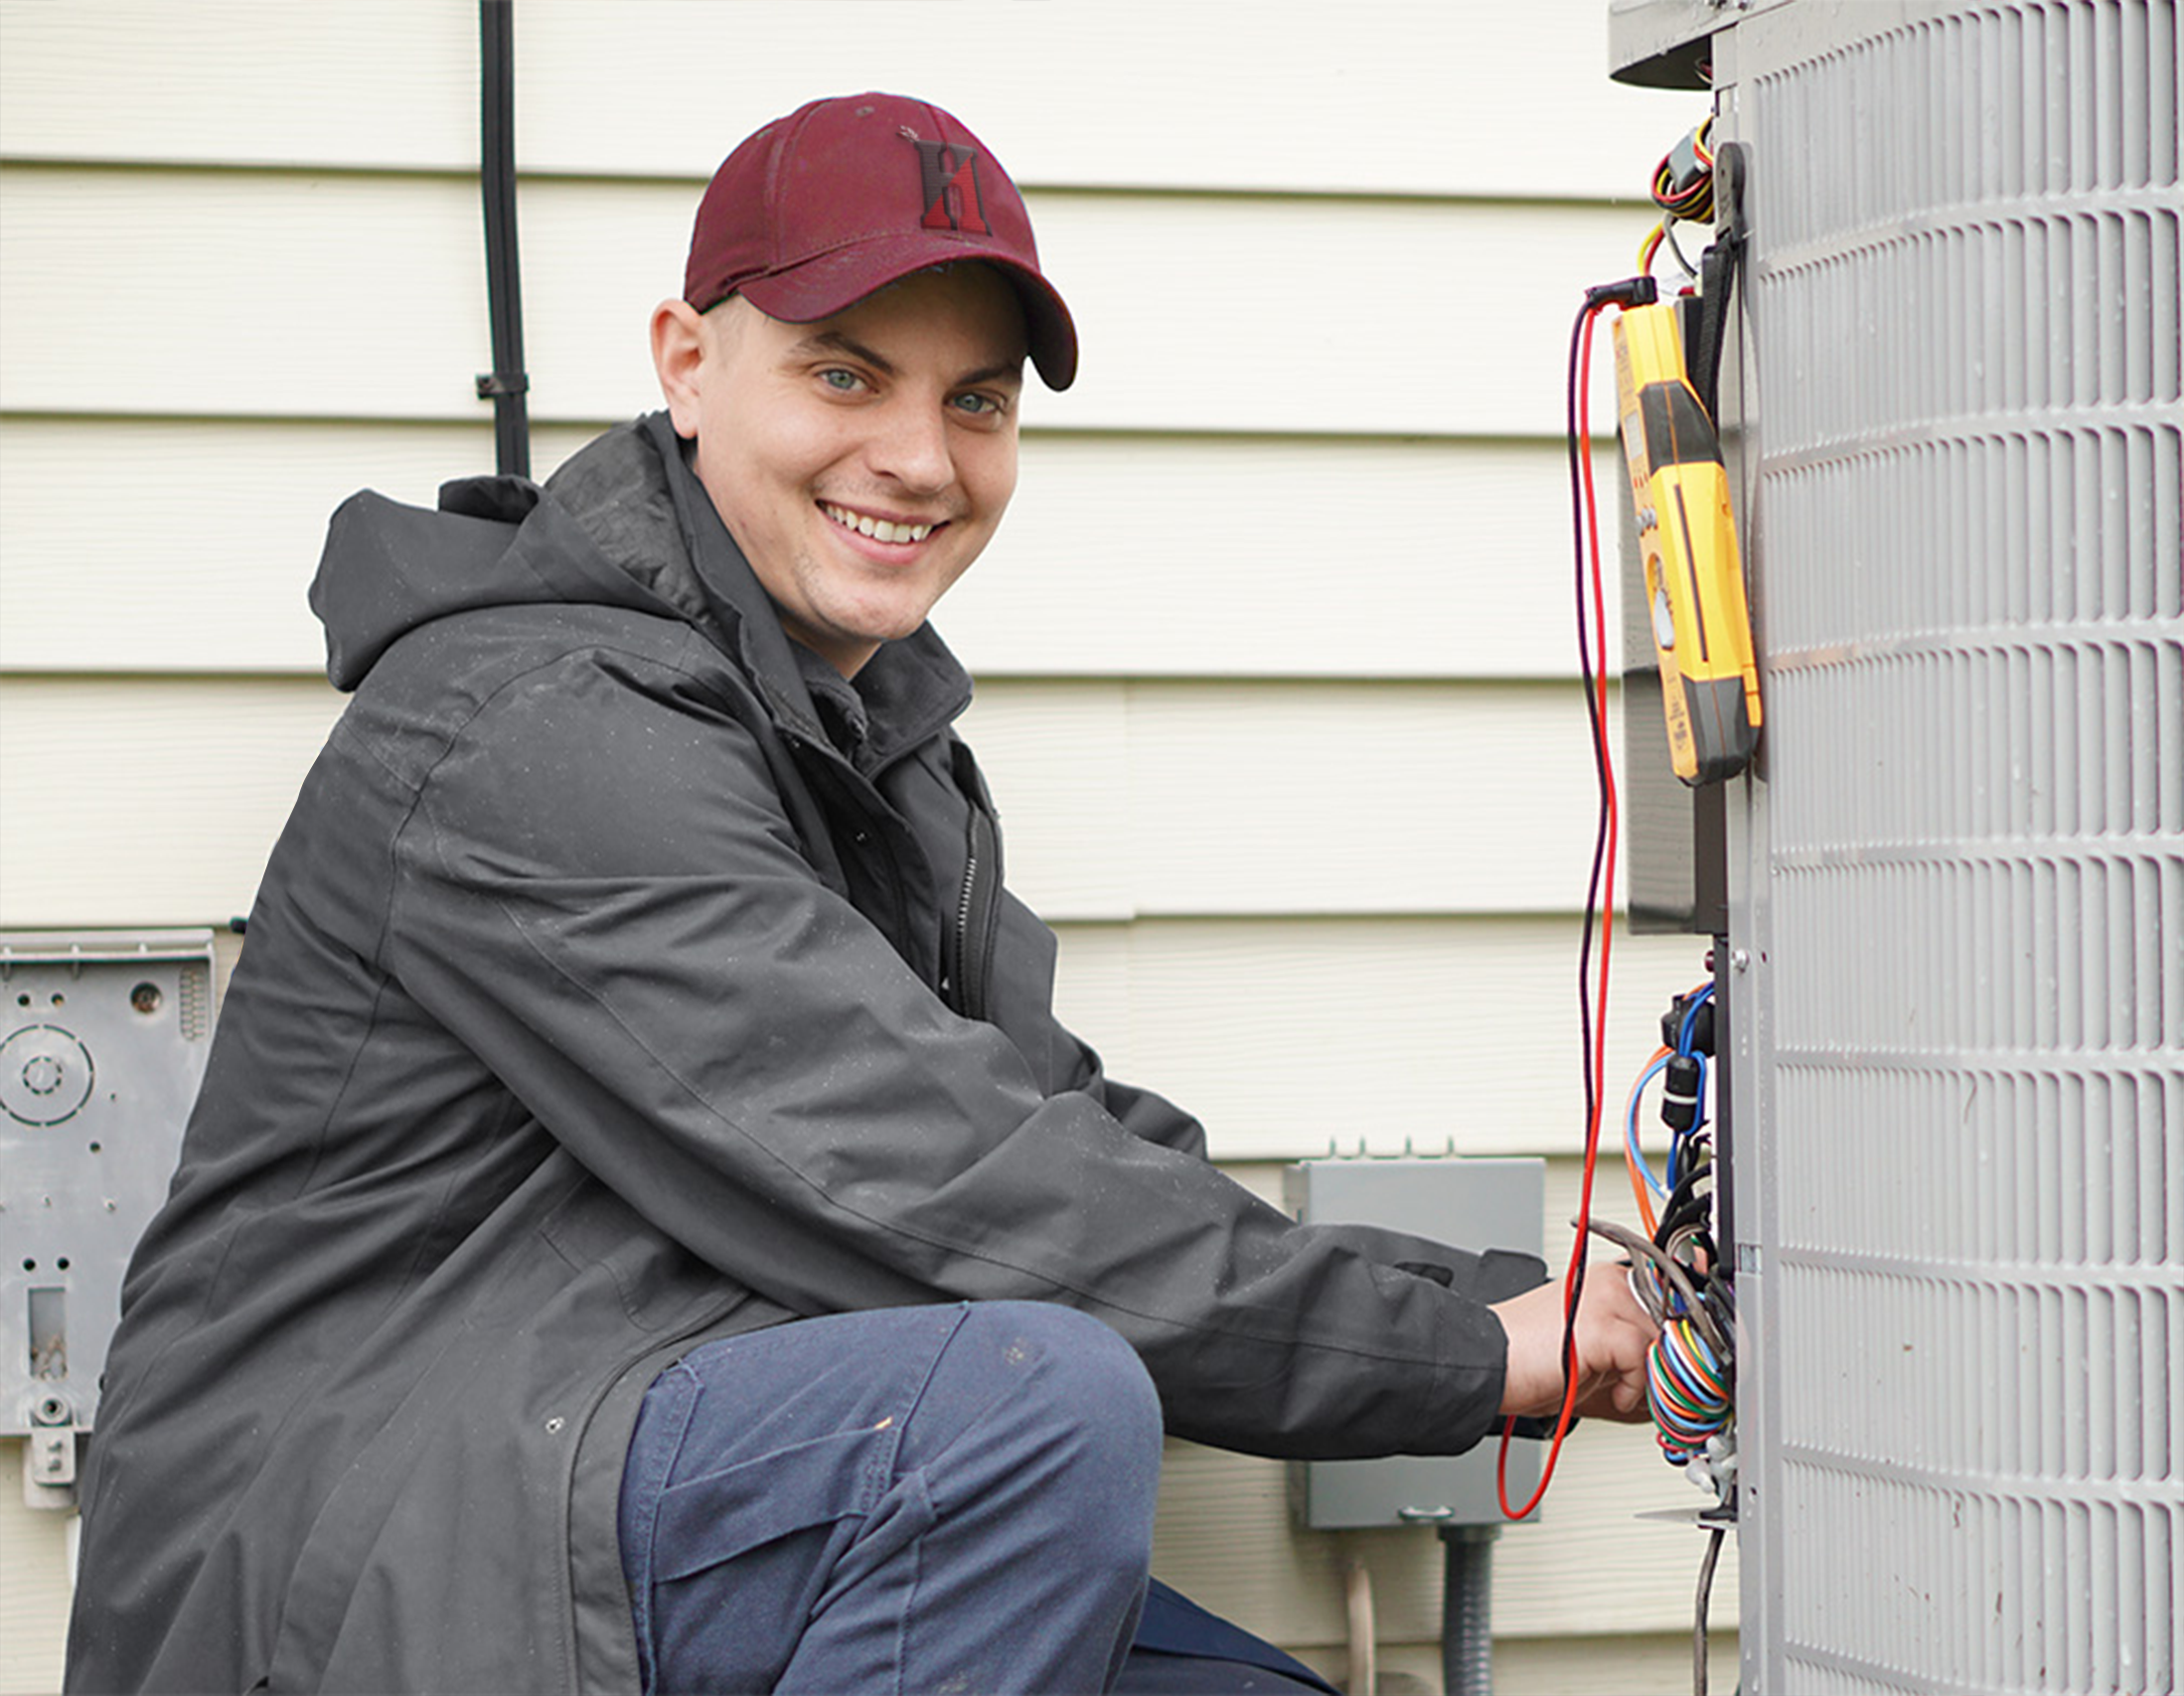 Furnace Repair Services in Huber Heights